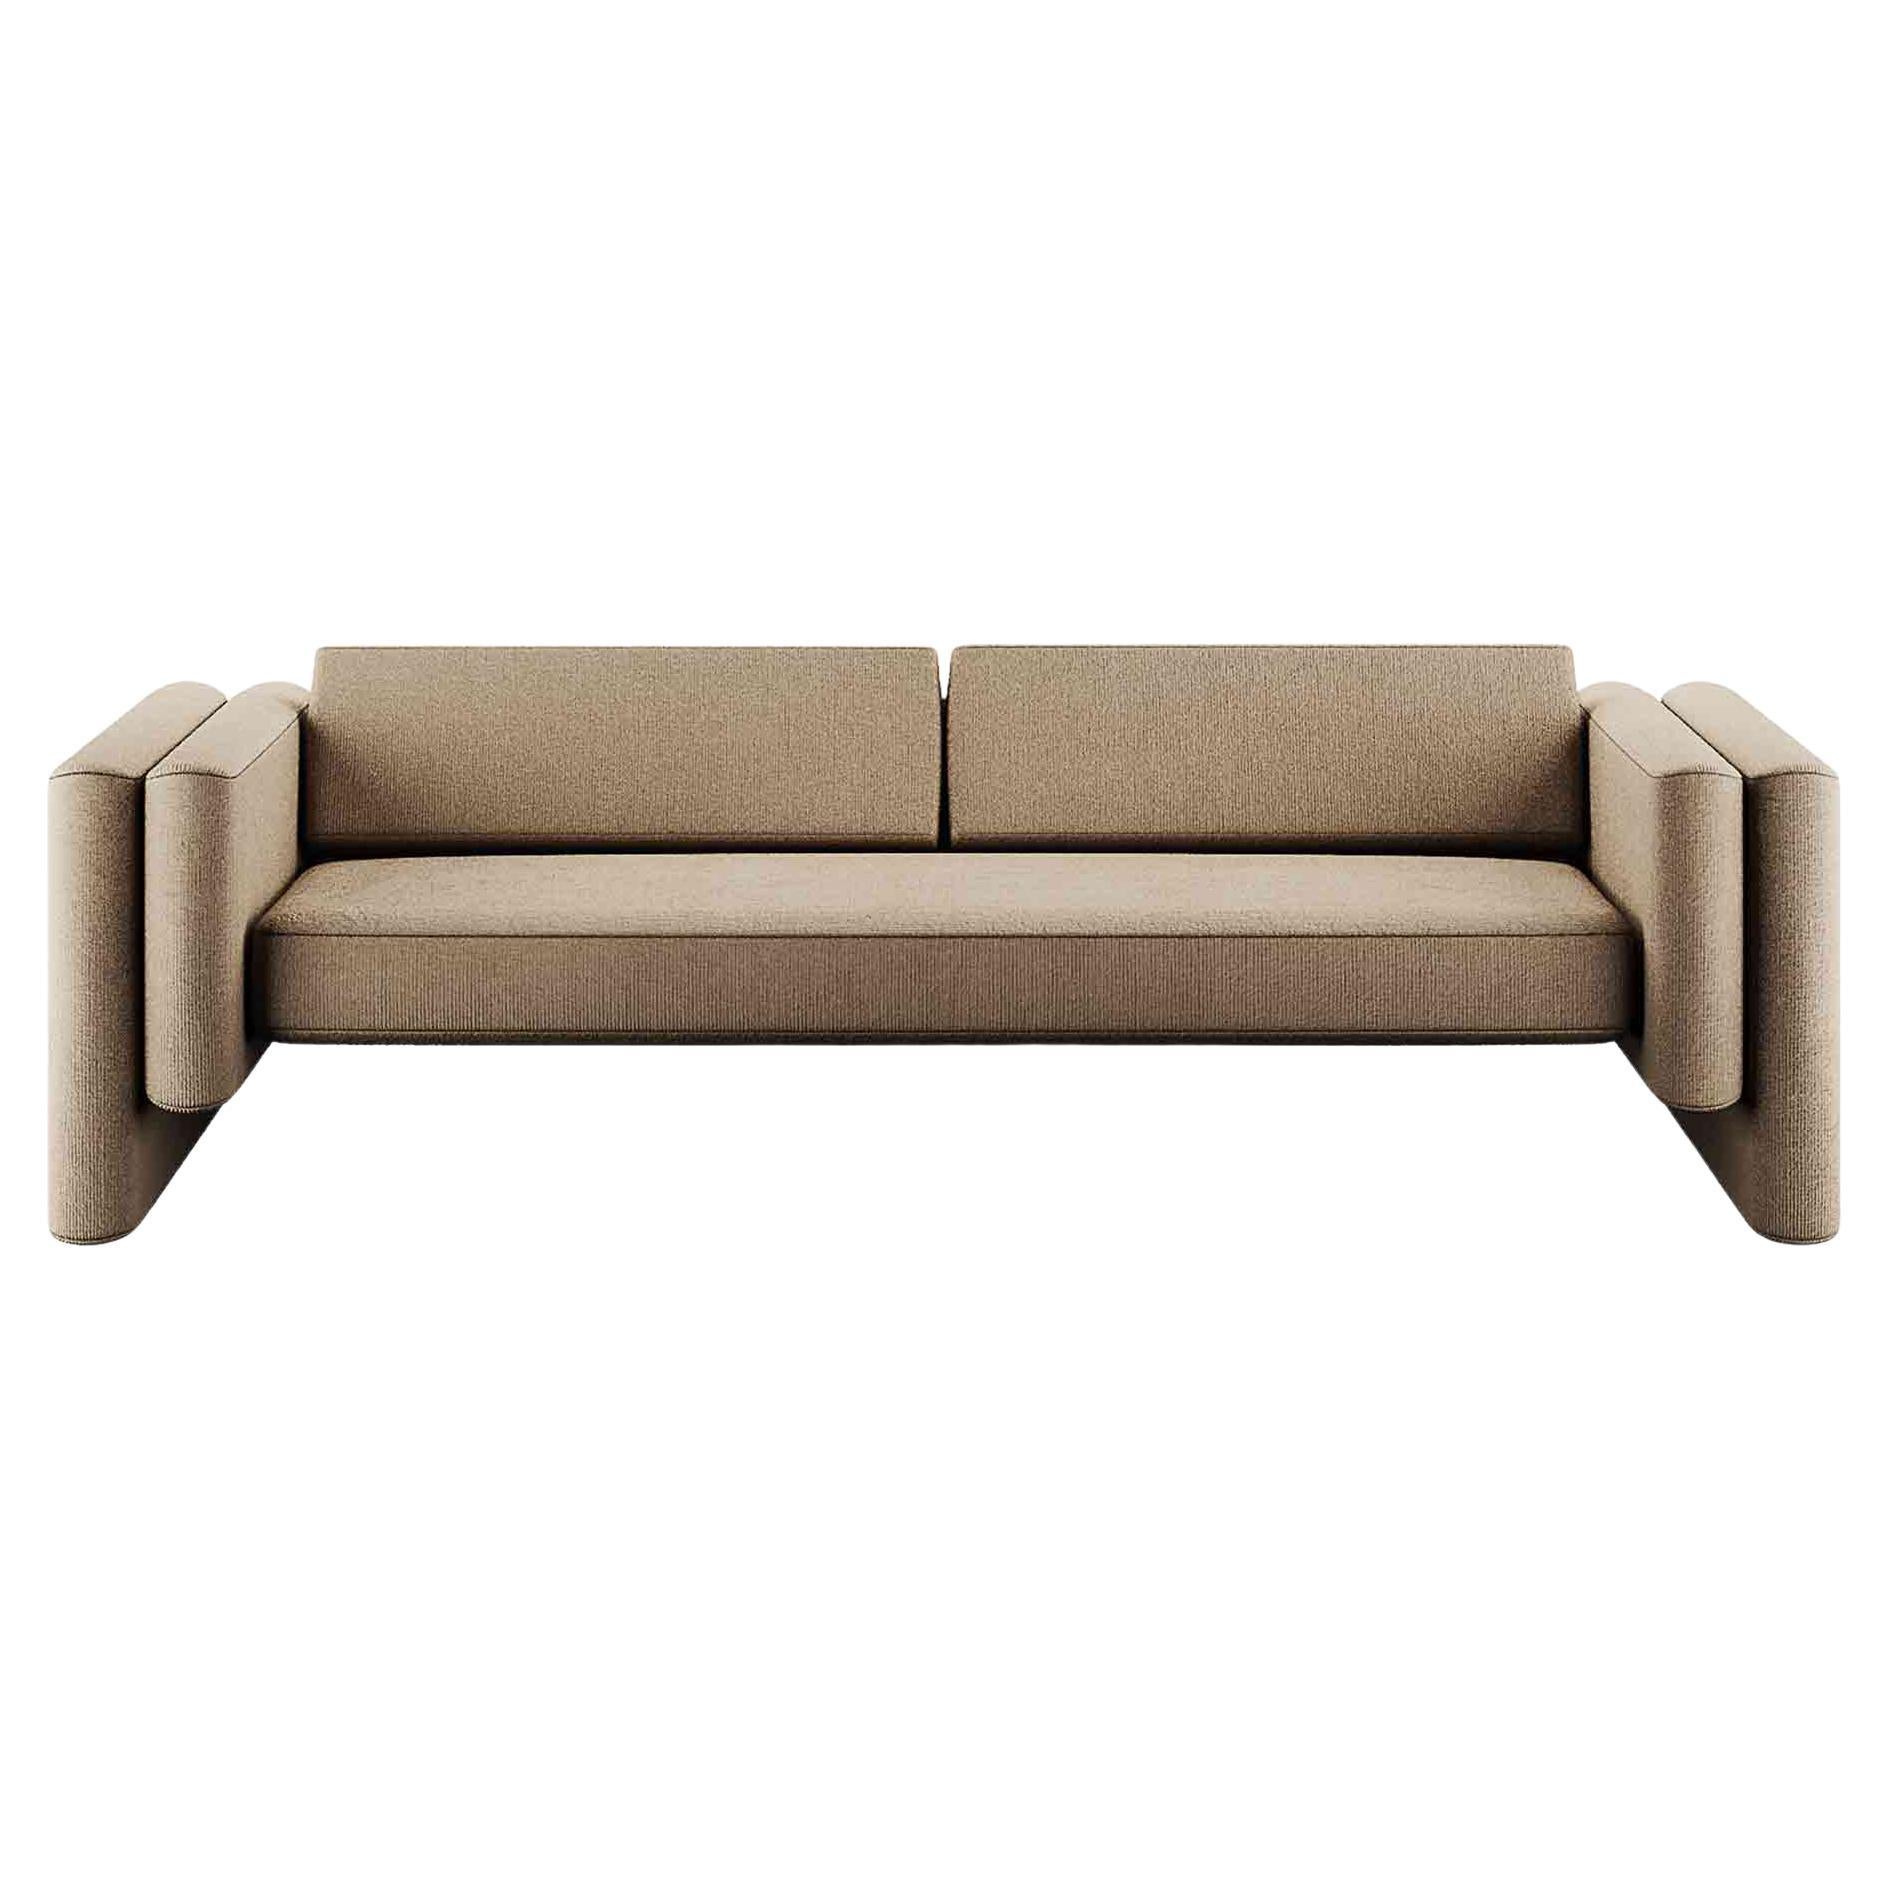 Modern Minimal Sofa with Clean Lines & Beige Corduroy Upholstery